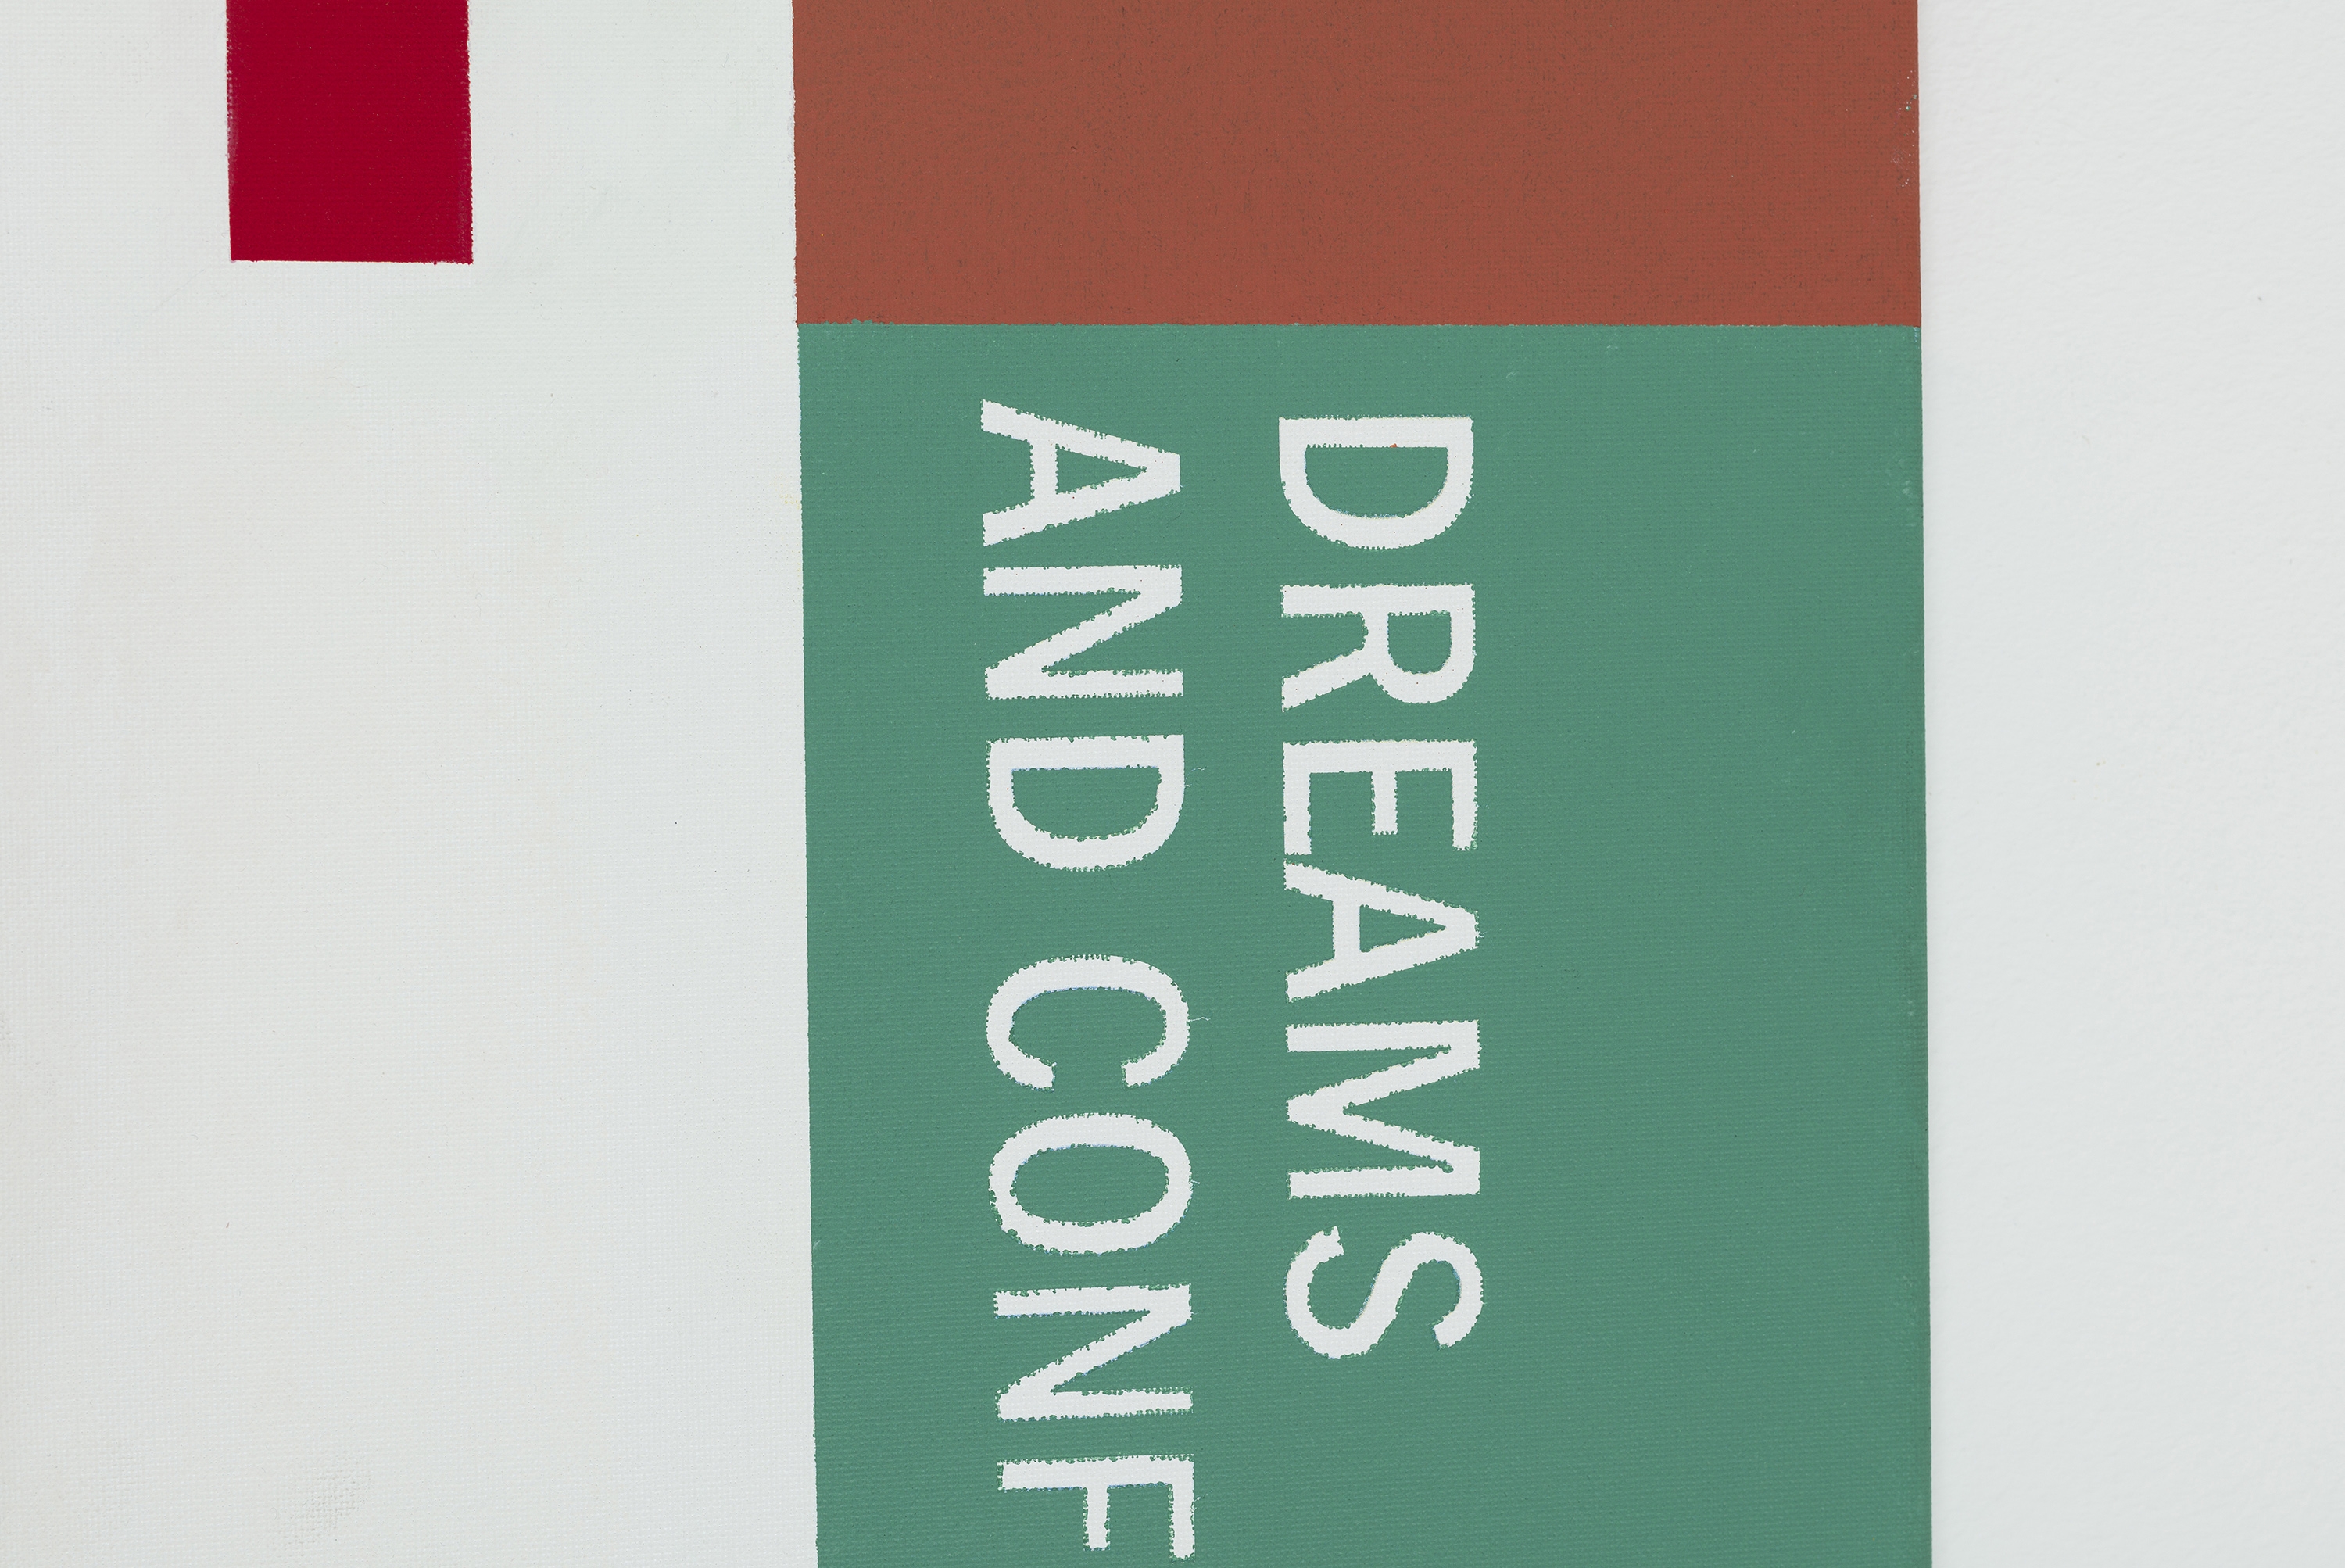 Dreams and Conflict from the cycle Art Paintings